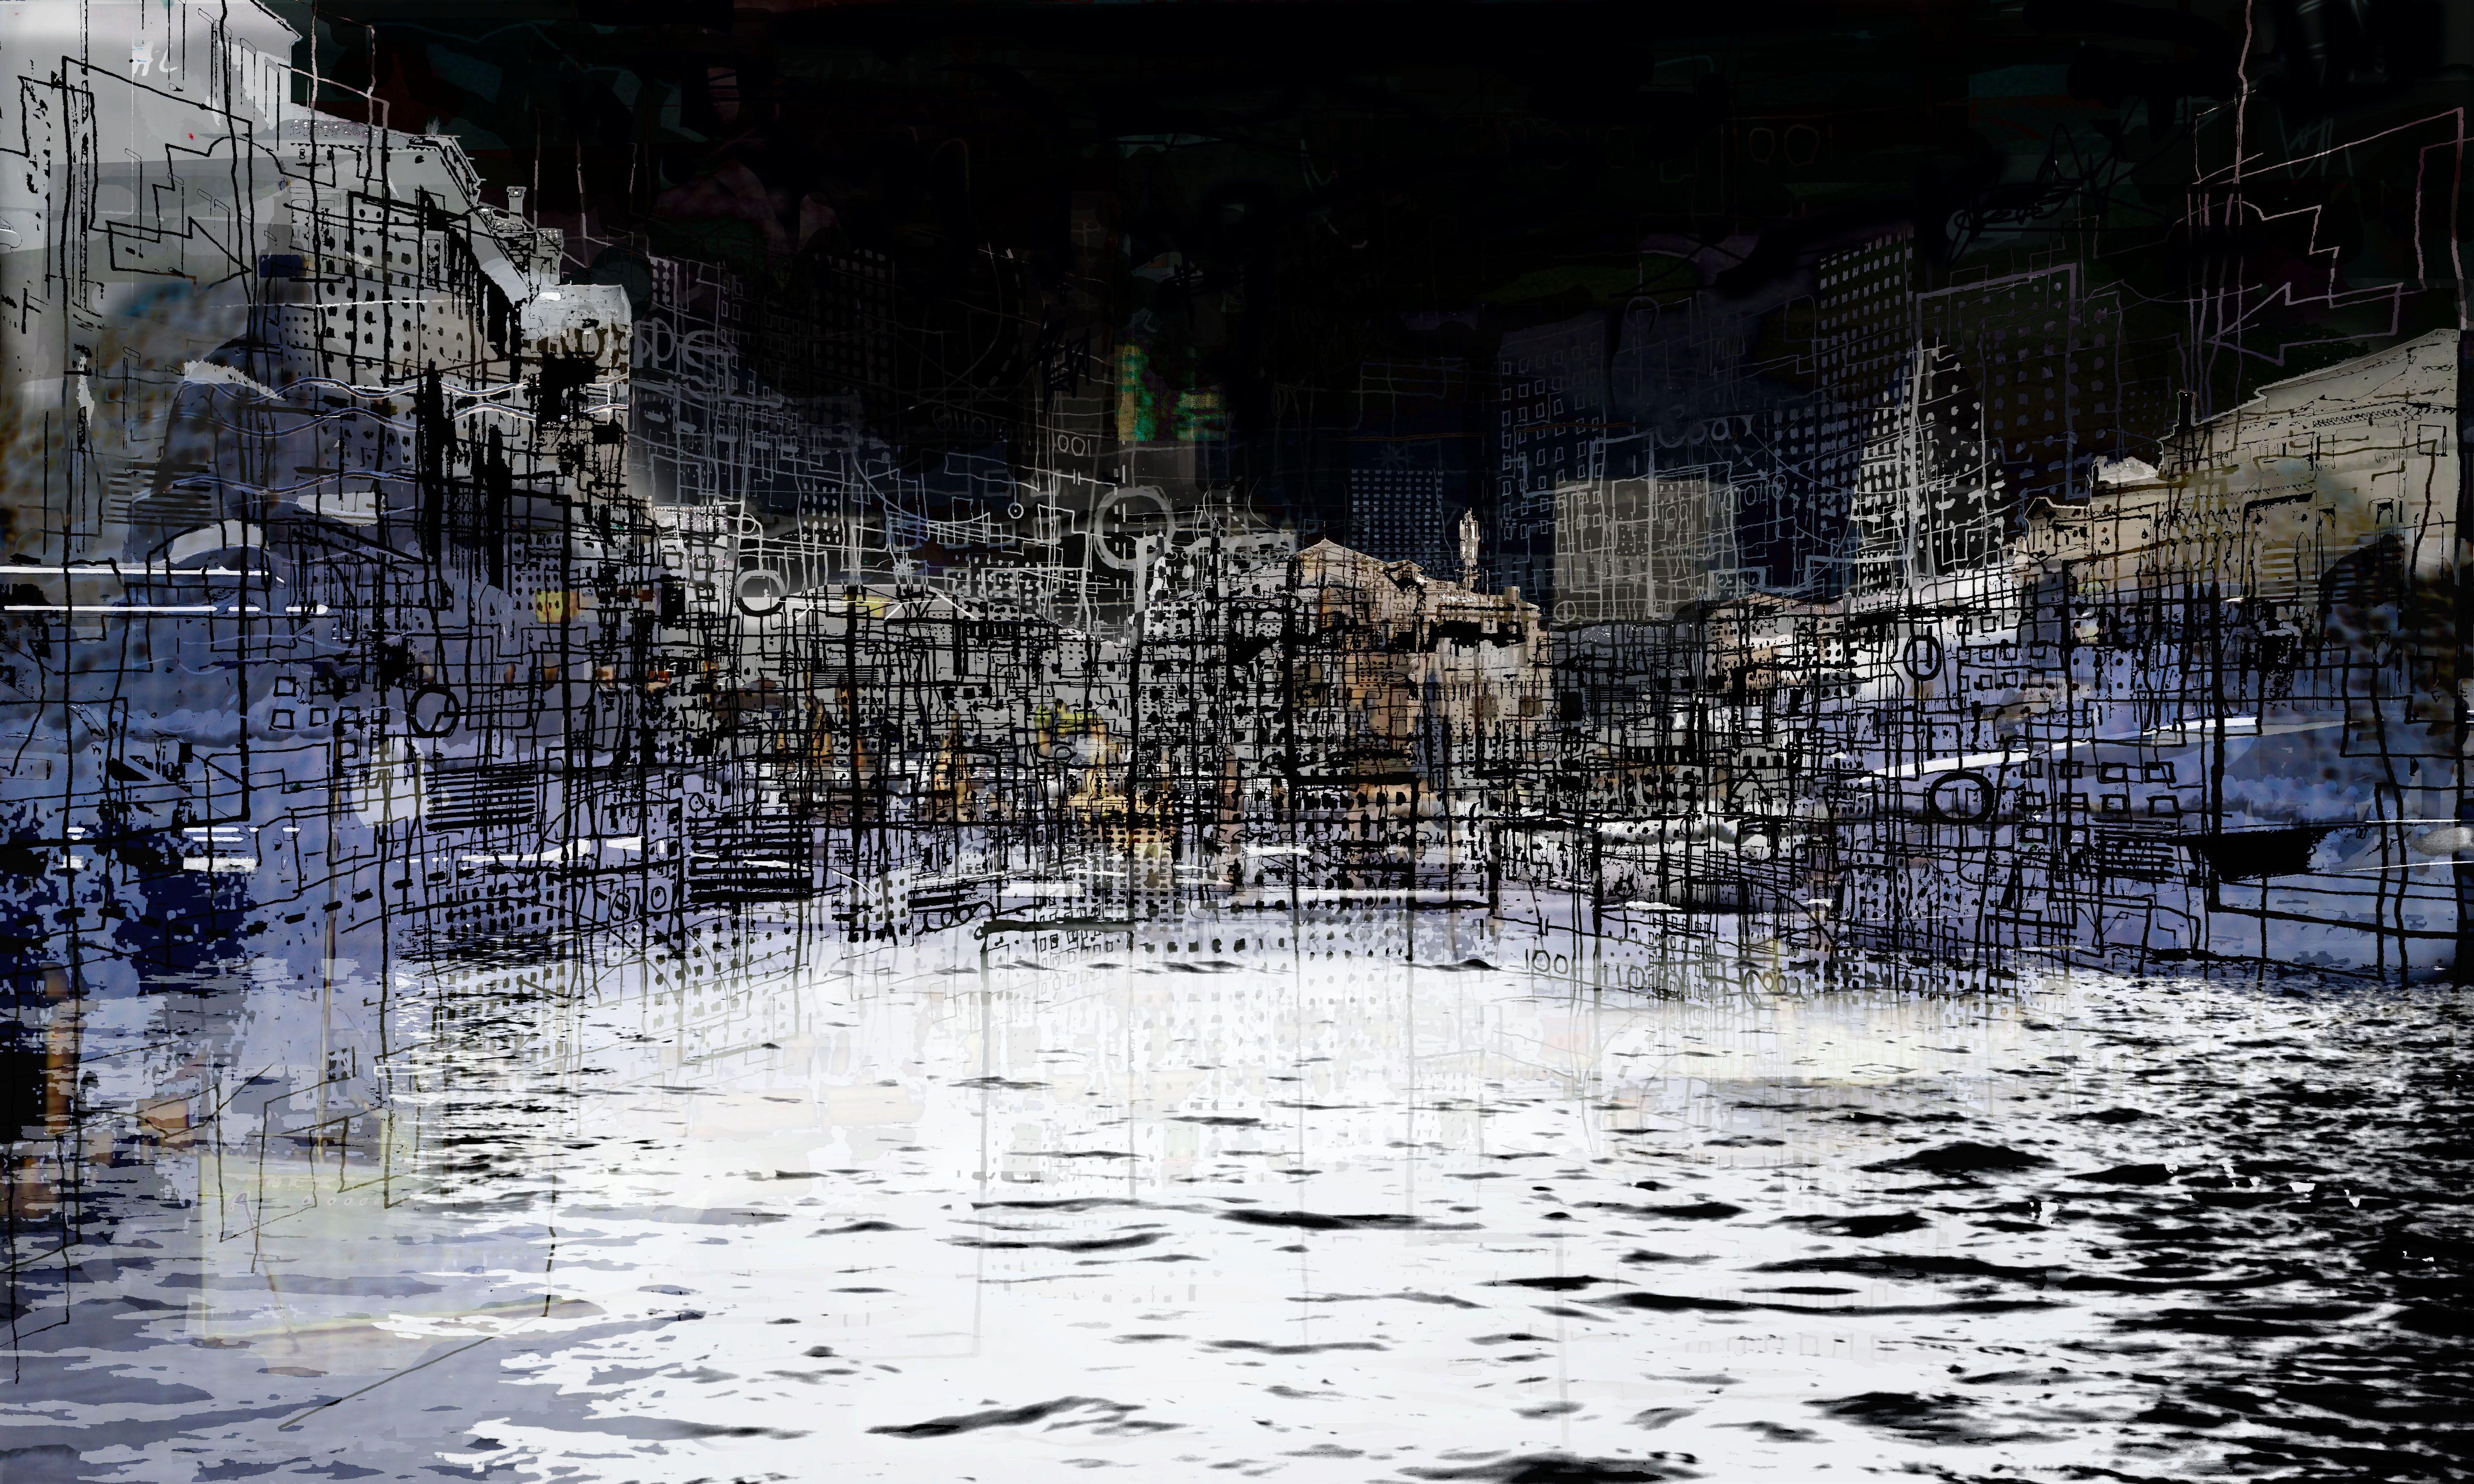 Andy Mercer Abstract Print - On the waterfront (Large), Digital on Paper